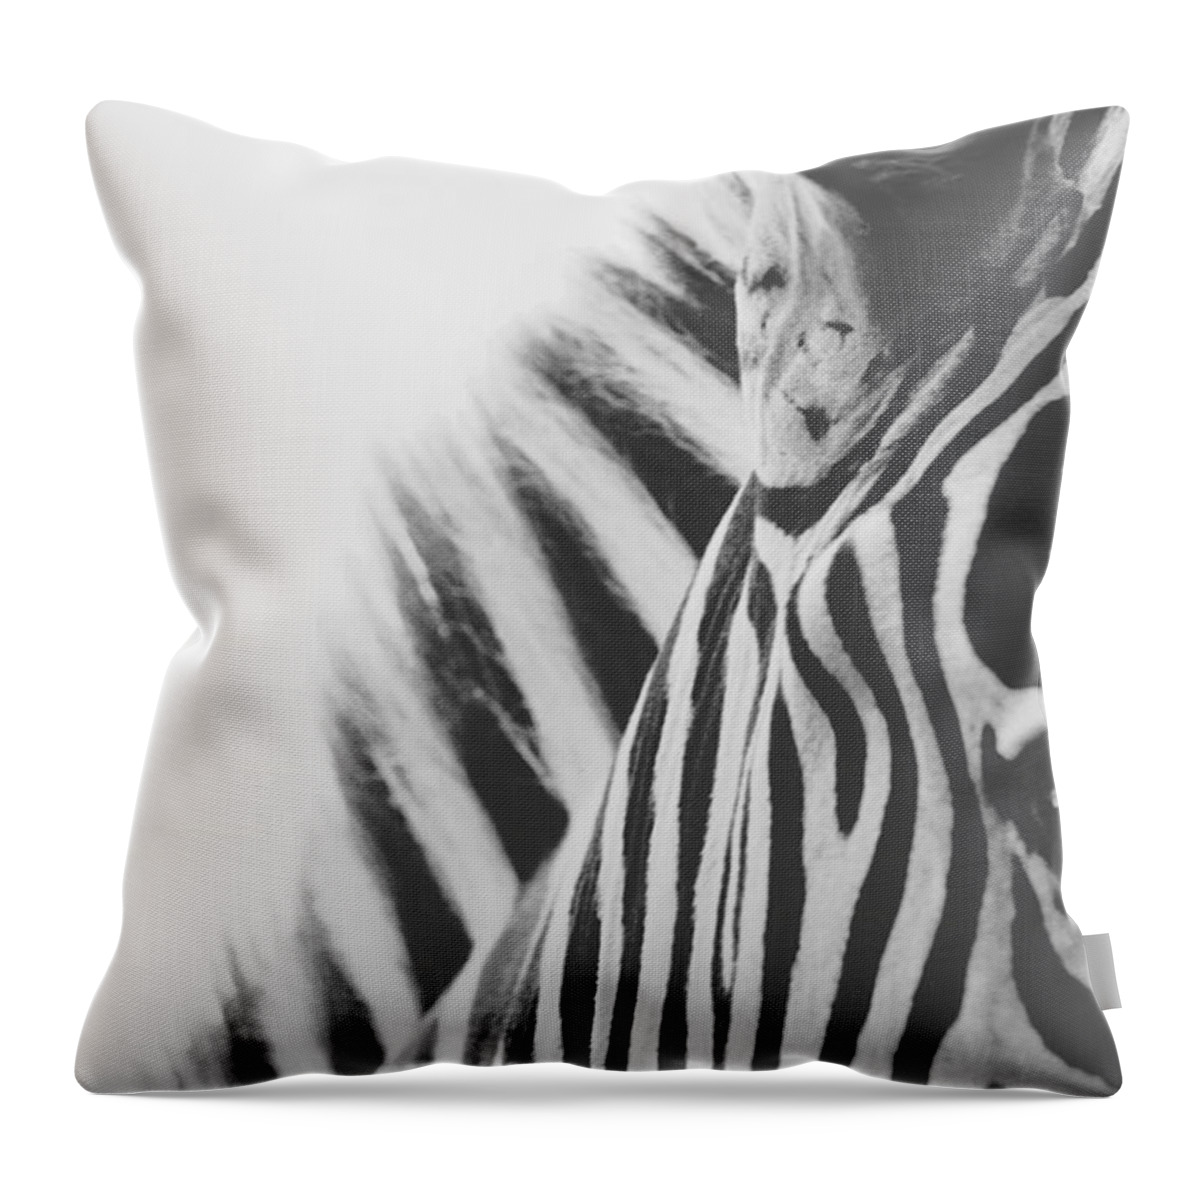 Black And White Throw Pillow featuring the photograph Visions by Carrie Ann Grippo-Pike